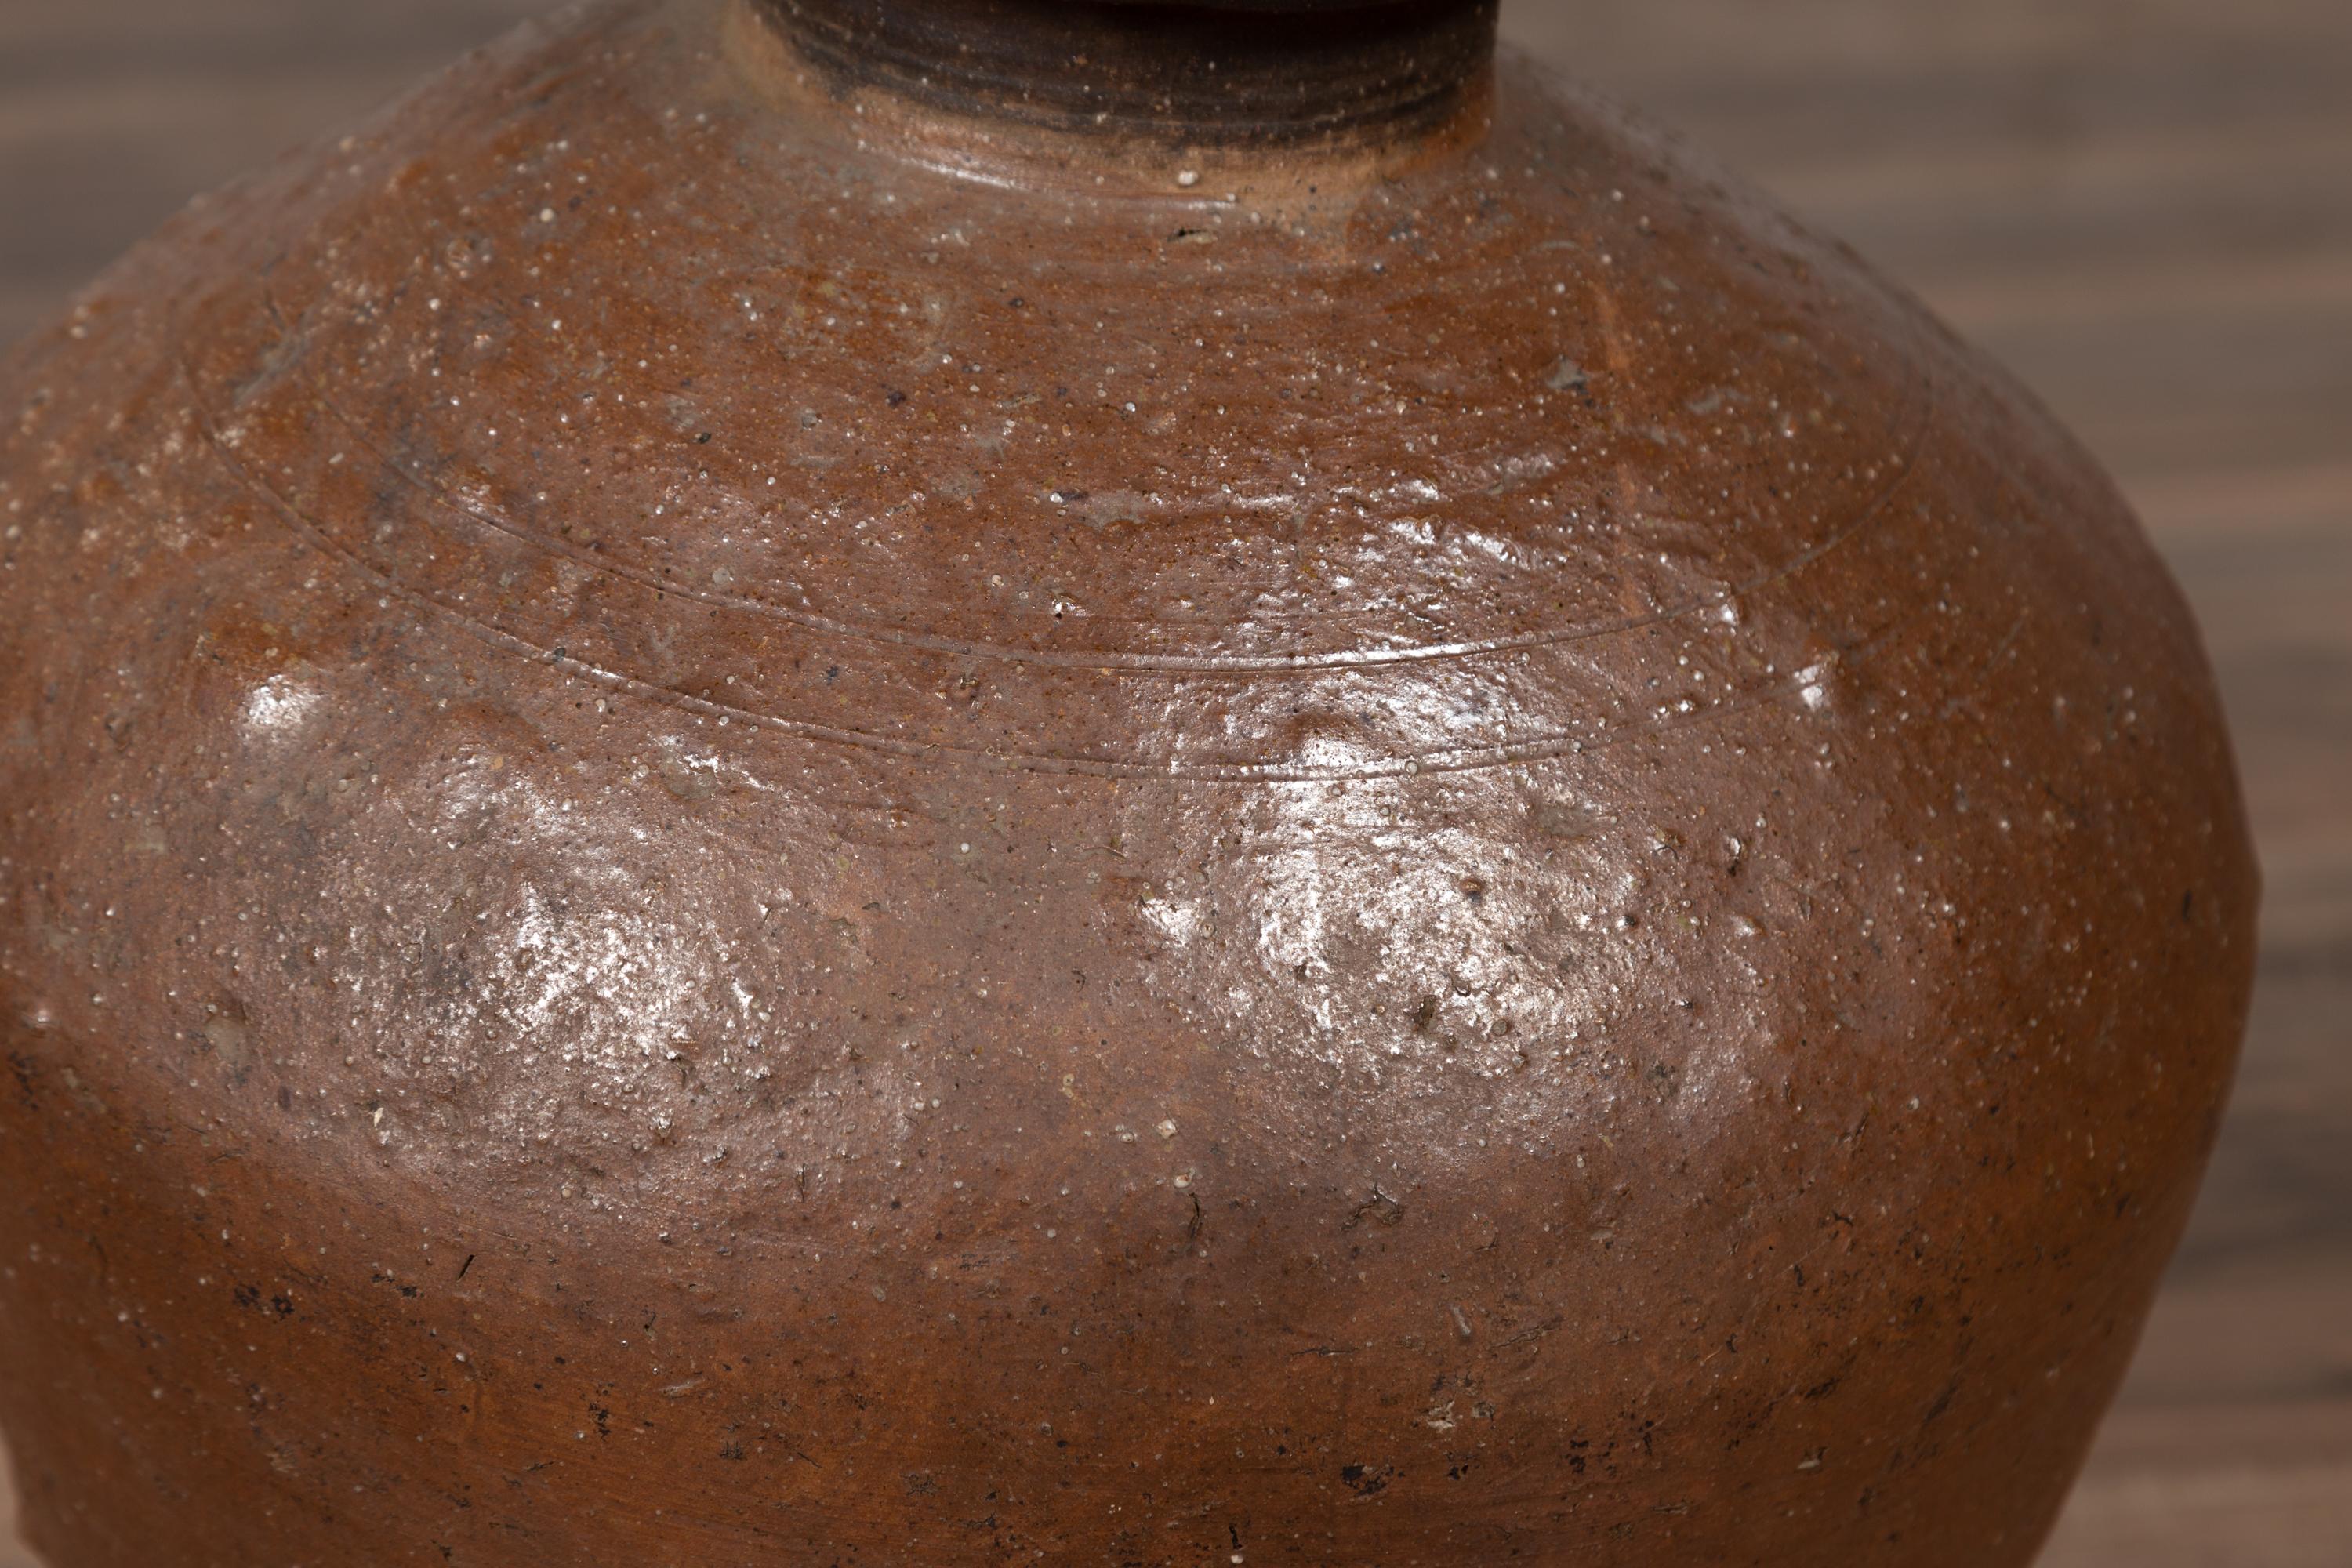 Antique Japanese Brown Oil Jar with Weathered Appearance and Irregular Shape In Fair Condition For Sale In Yonkers, NY